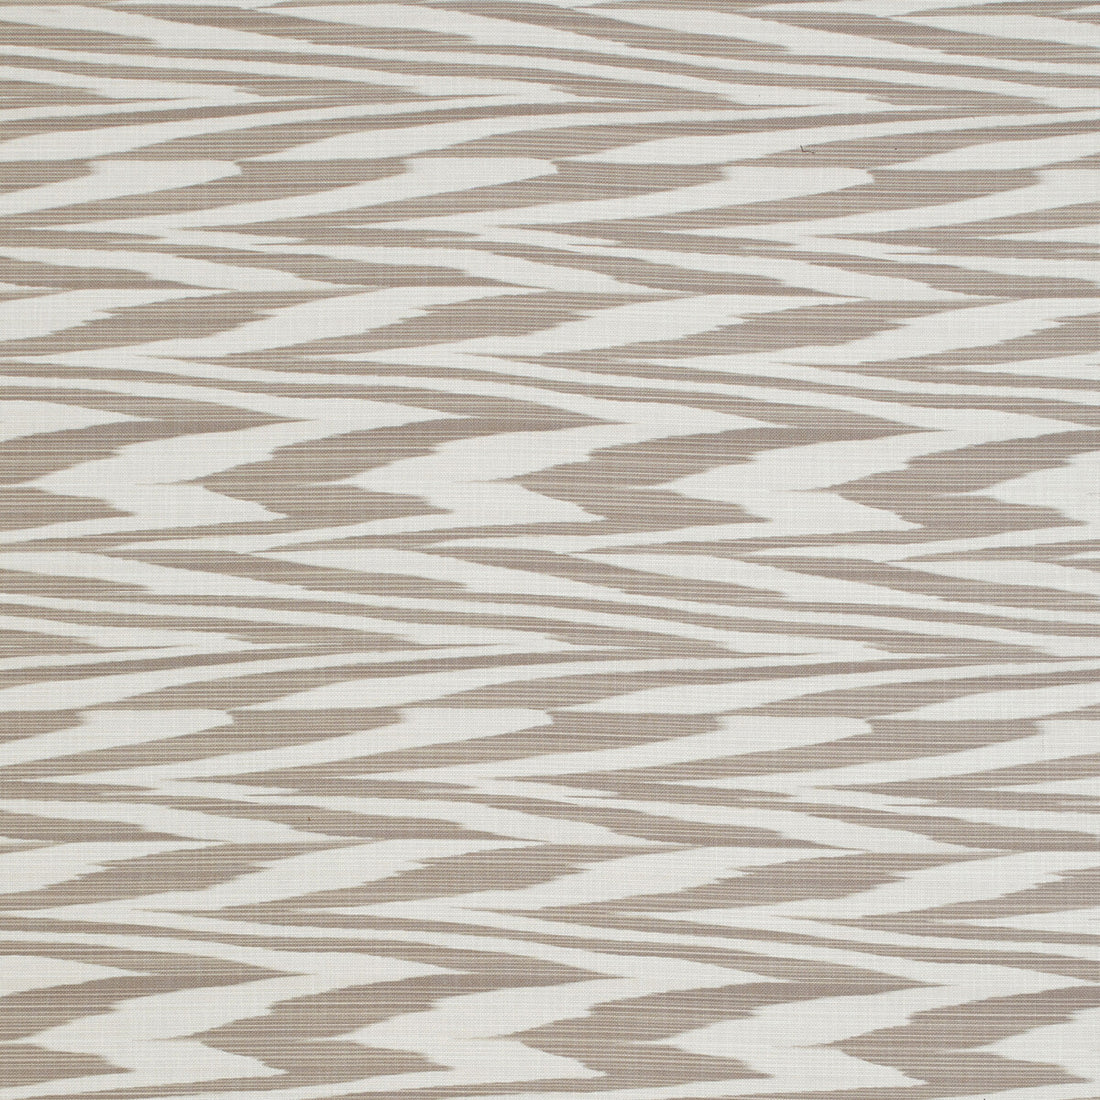 Atacama Outdoor fabric in 721 color - pattern 36156.106.0 - by Kravet Couture in the Missoni Home 2021 collection